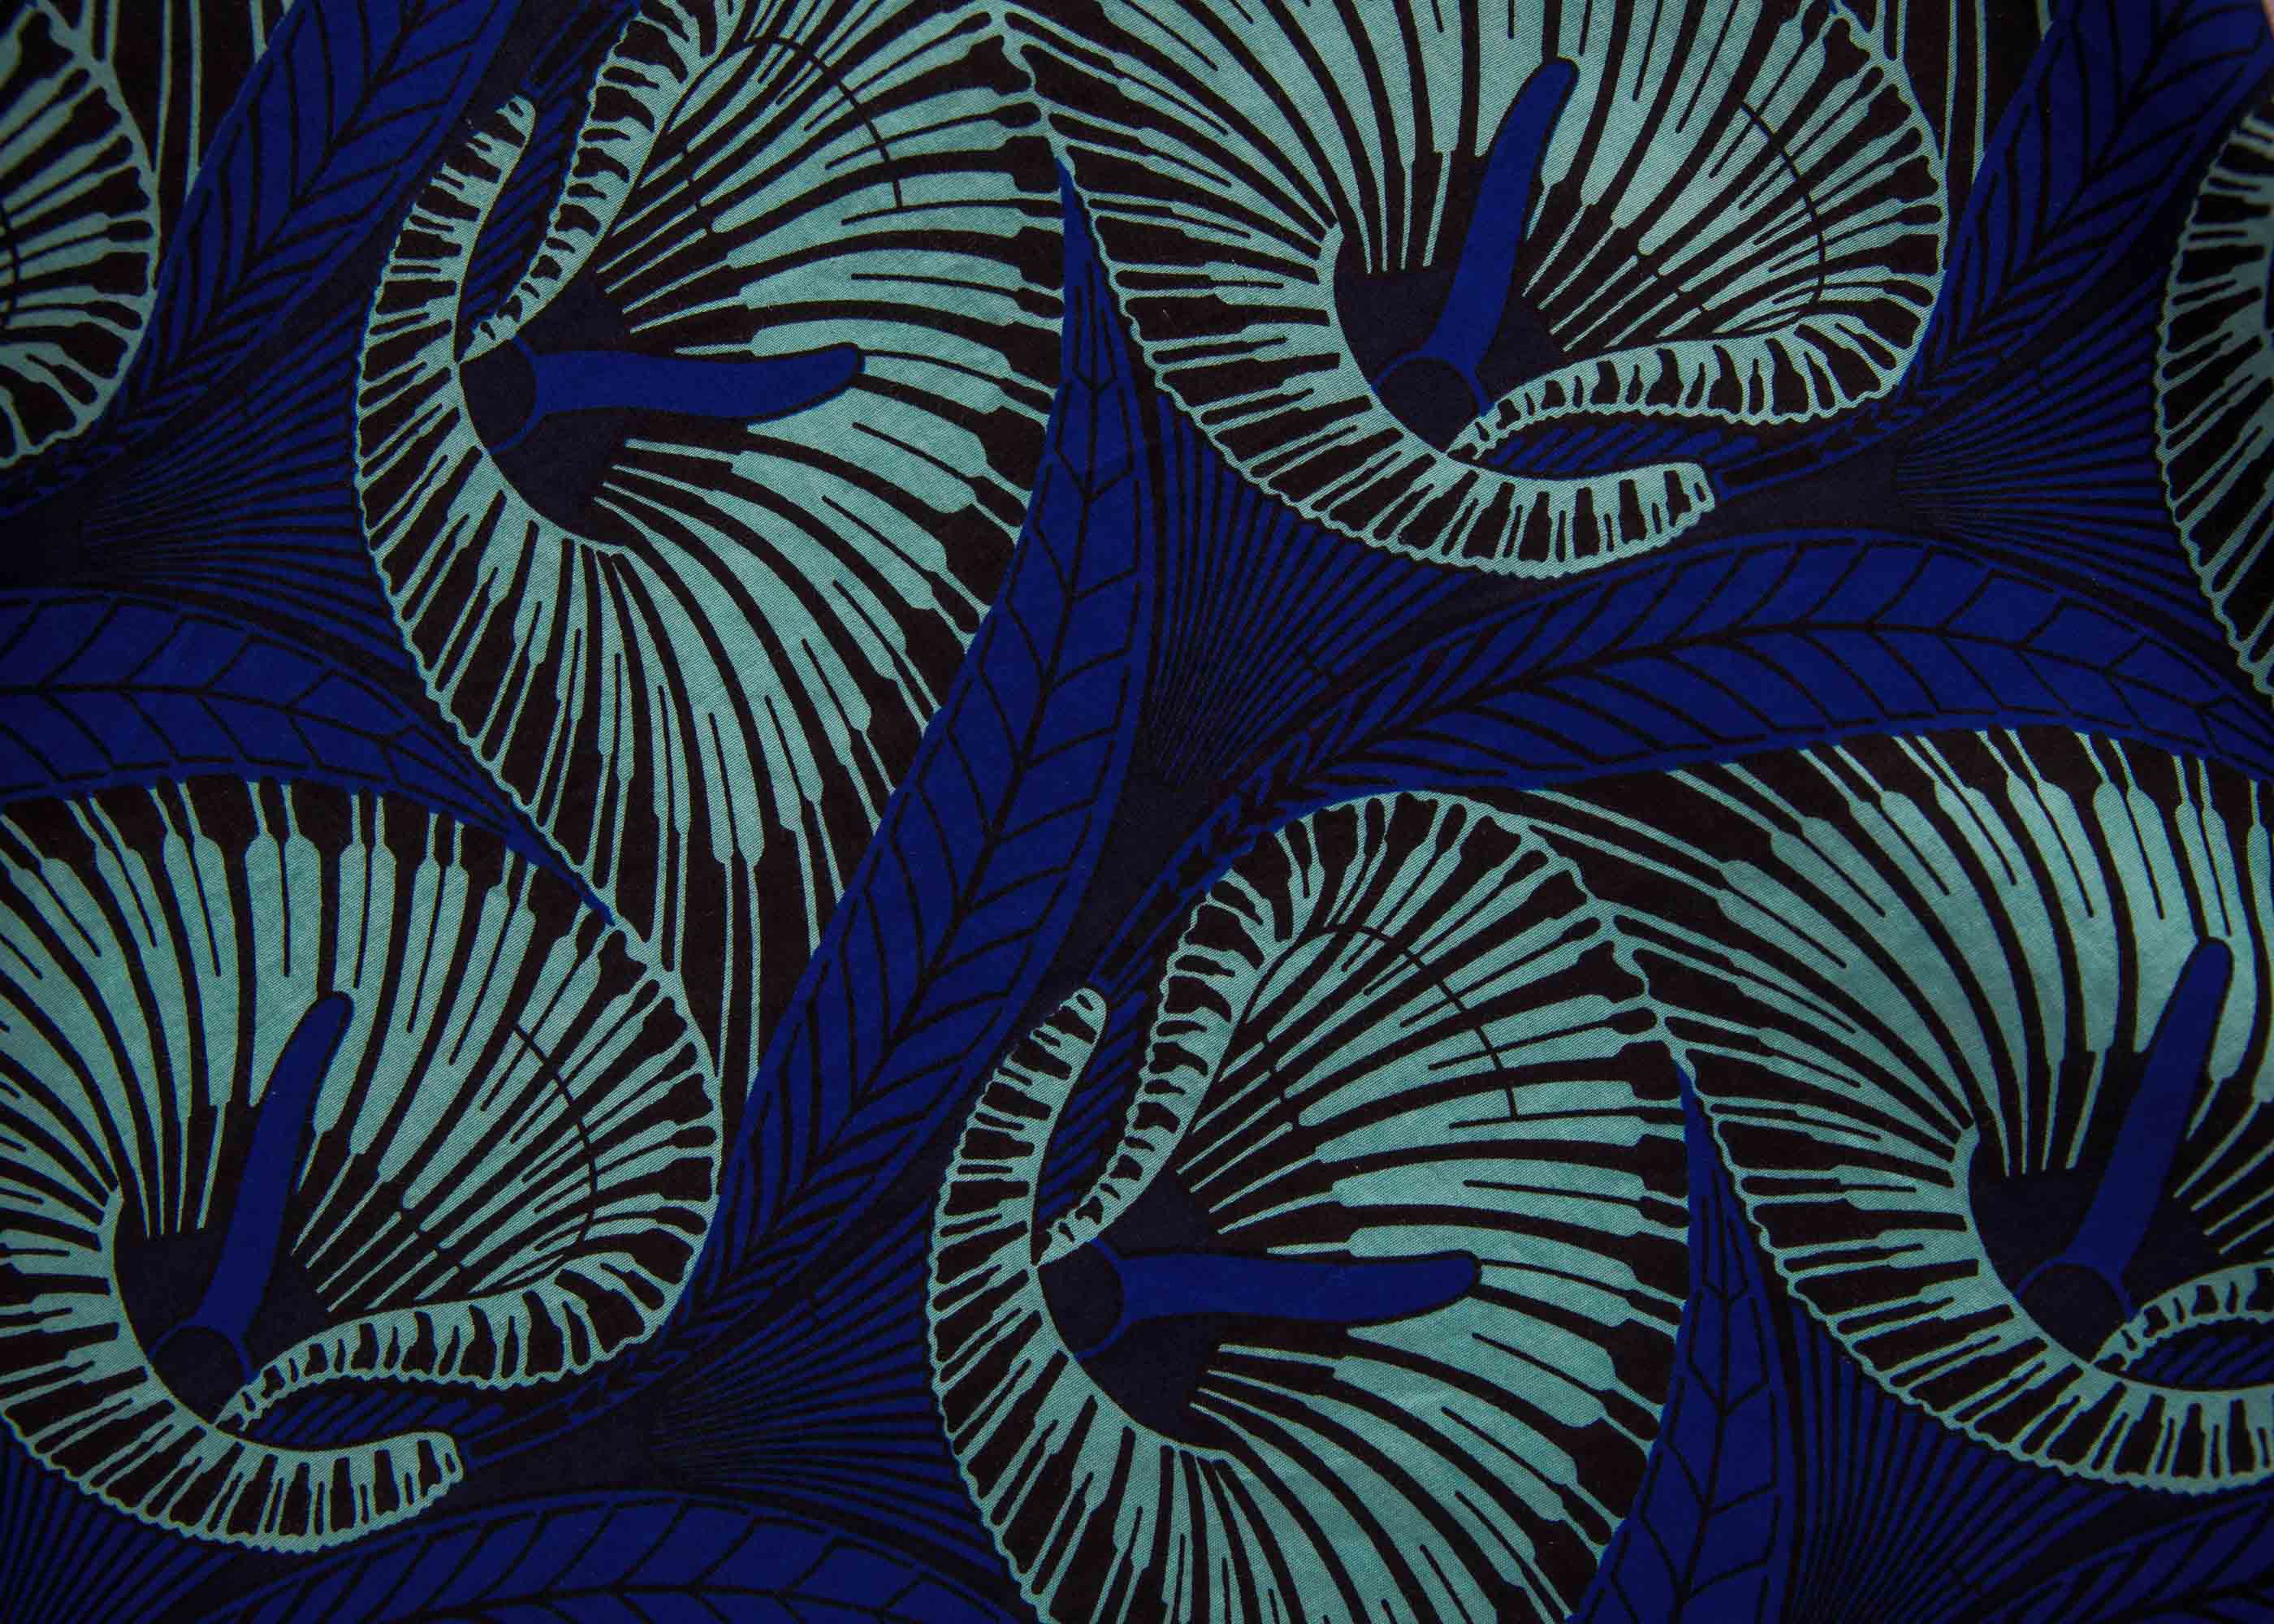 Display of a blue lily design dress